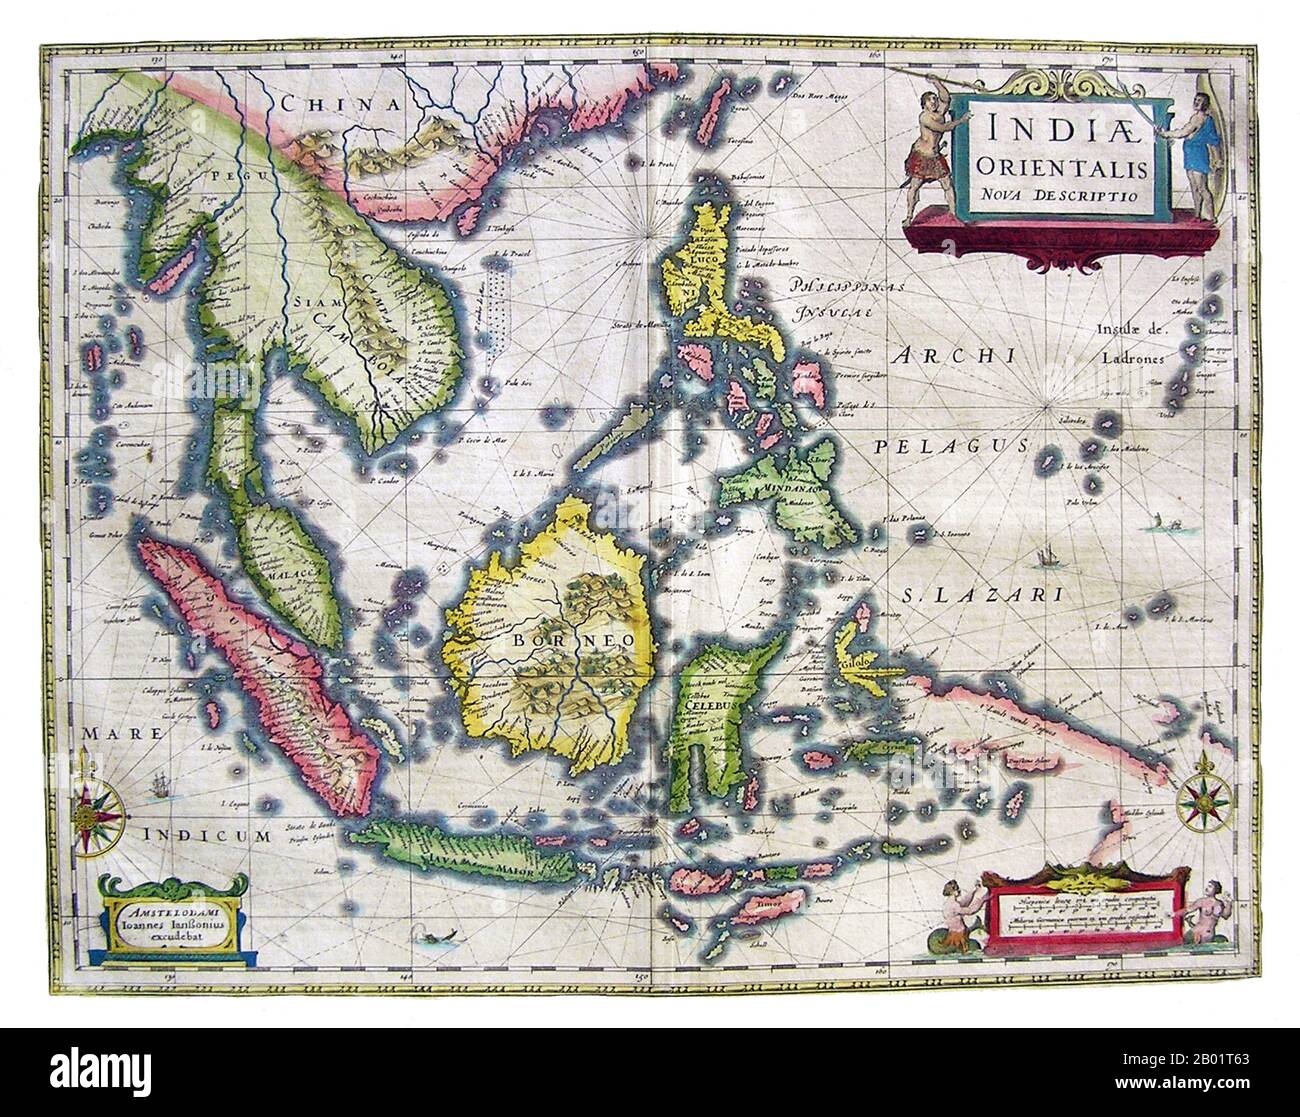 Asia: India Orientalis Nova Descriptio. Map by Dutch cartographer Jan Jansson (1588-1664), 1636.  An early map of Southeast Asia showing the extent and limitations of European knowledge of the region. While the larger islands of Indonesia are charted with some accuracy, the southern coast of Java and the Lesser Sundas are charted only in general outline, and New Guinea is particularly incomplete.  In all areas we see coastal features and settlements, but there is little interior detail. The Philippines are well described, and the Mariana Islands (Ladrones) are given undue size and prominence. Stock Photo